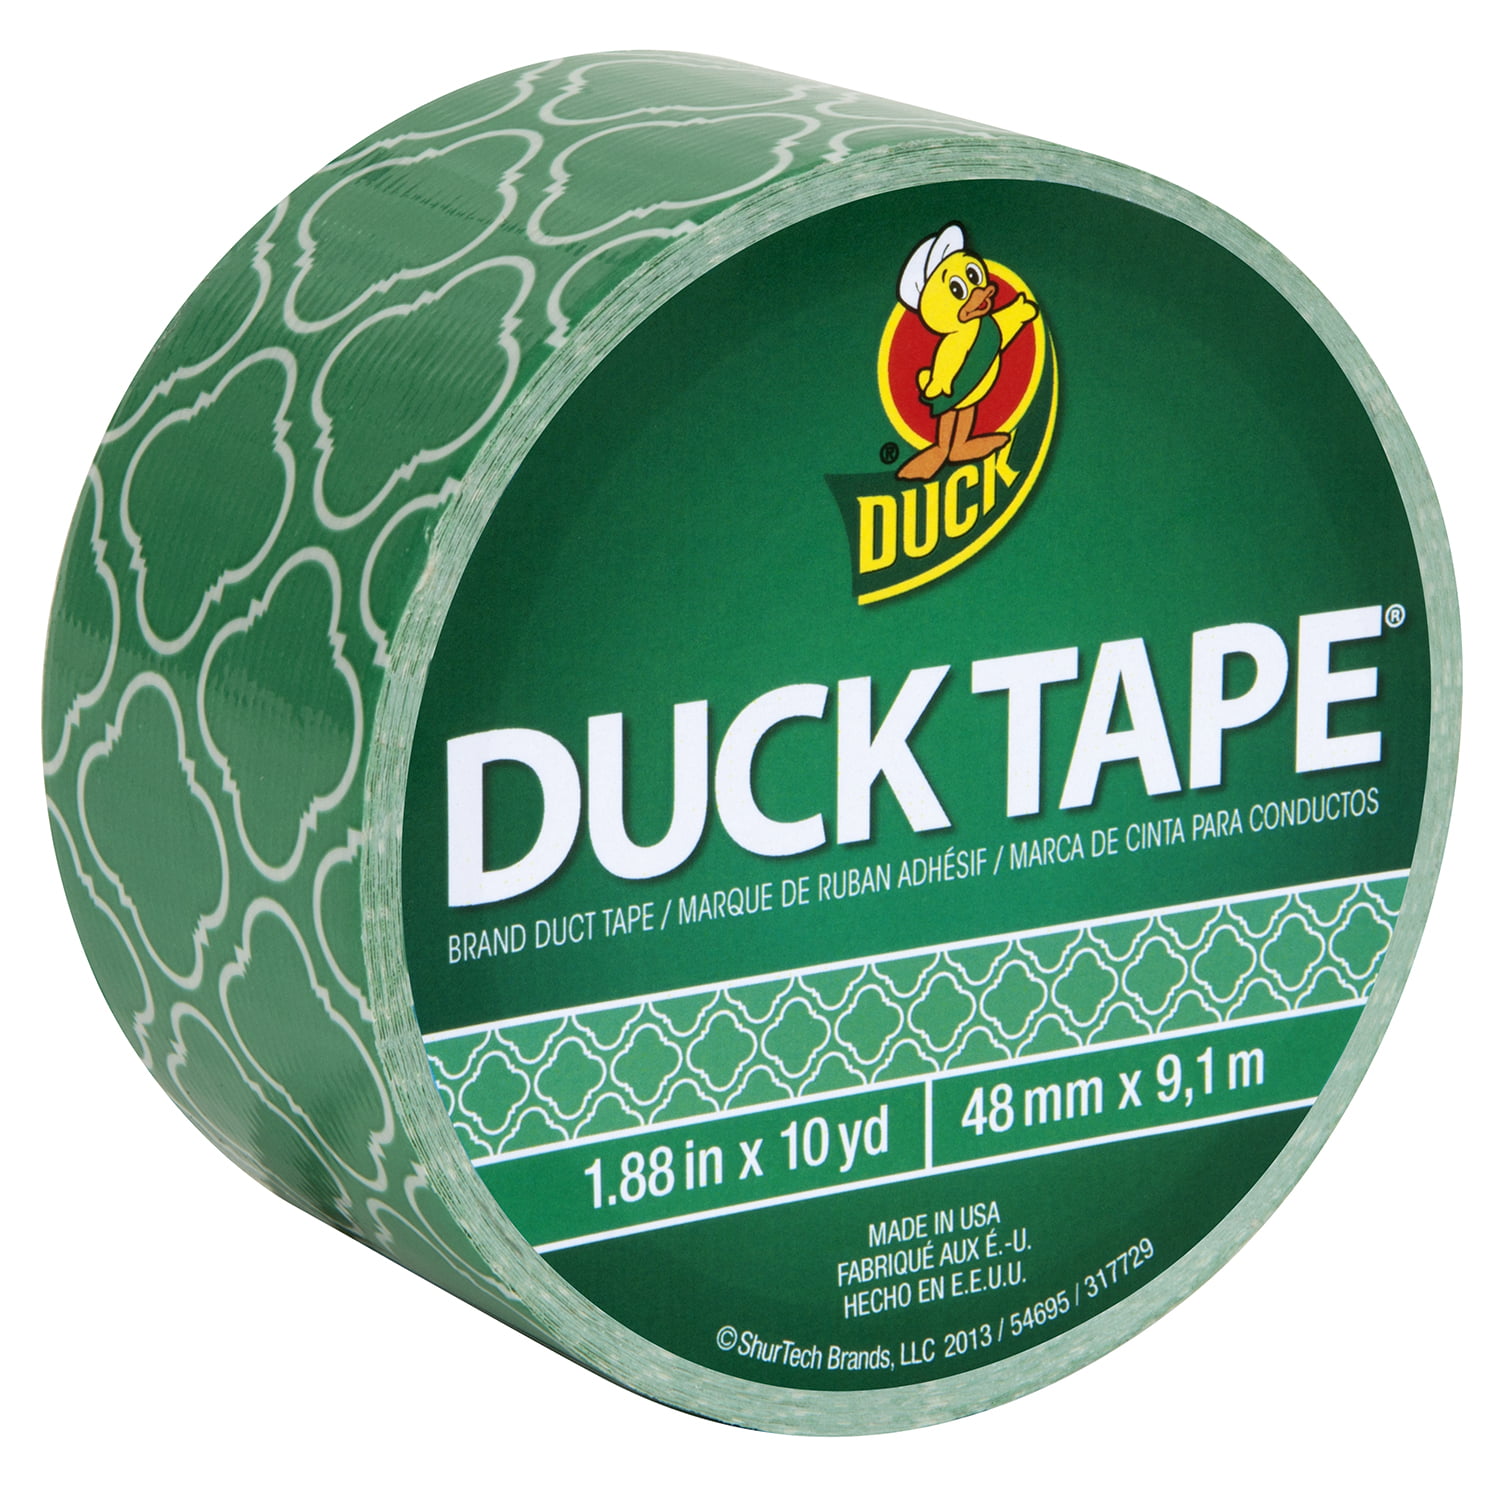 Printed Duck Tape Brand Duct Tape - Emerald Tile, 1.88 in. x 10 yd ...